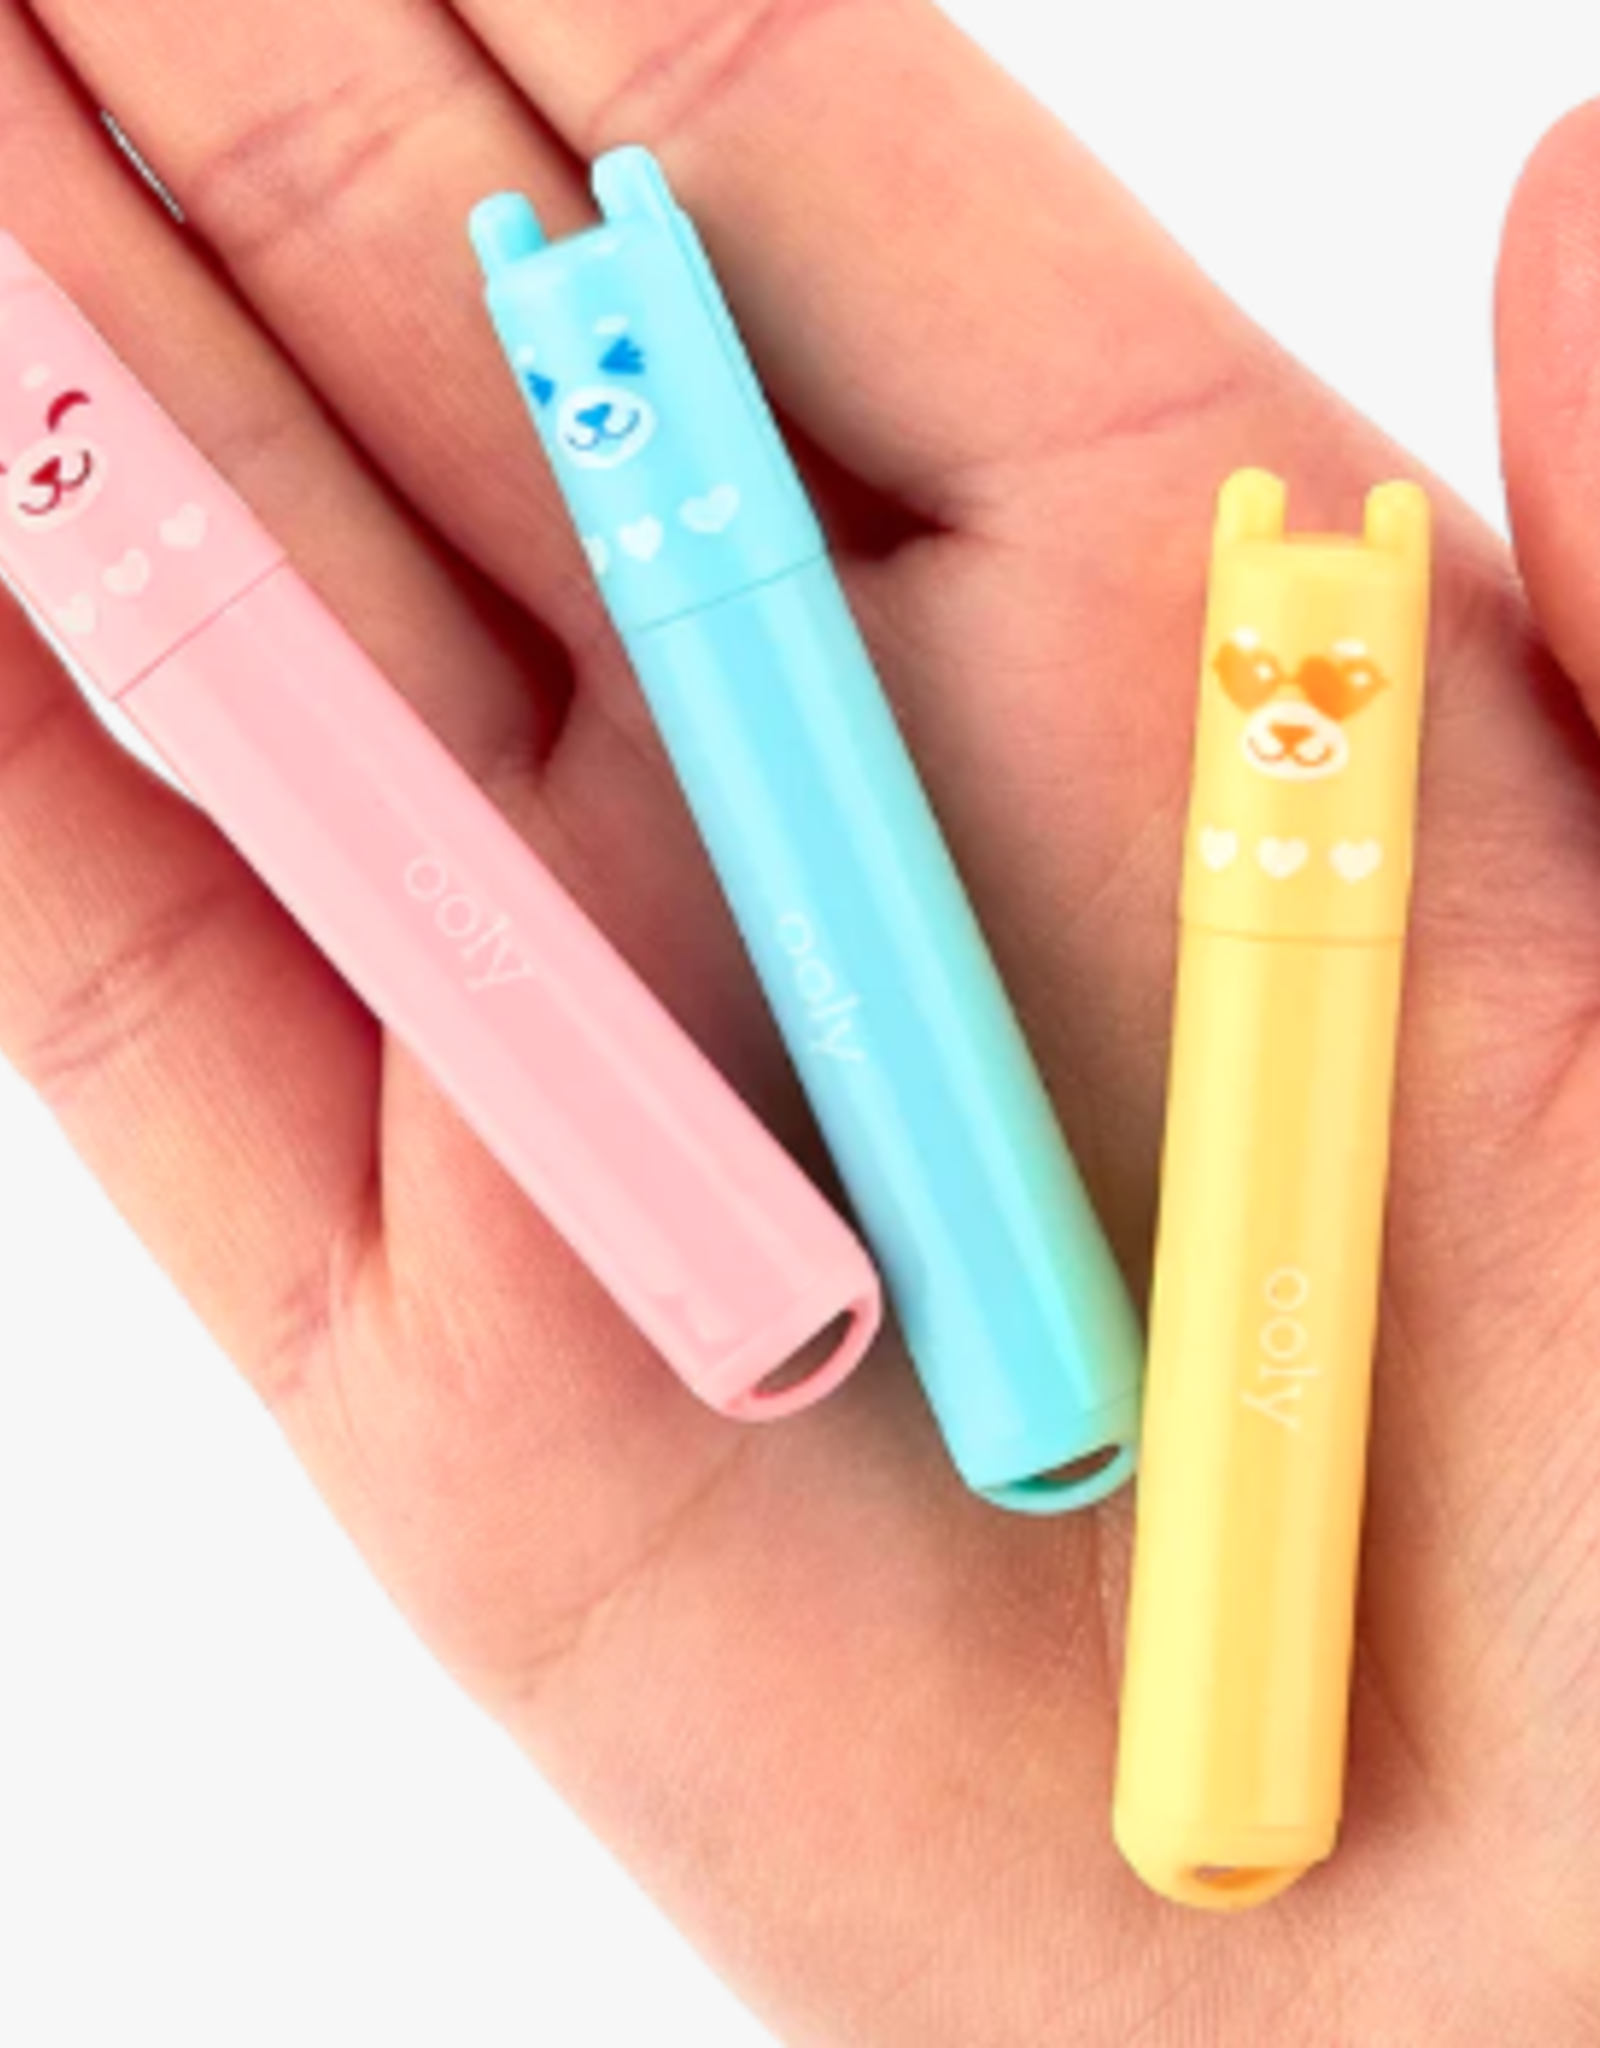 OOLY Beary Sweet Mini Scented Highlighters